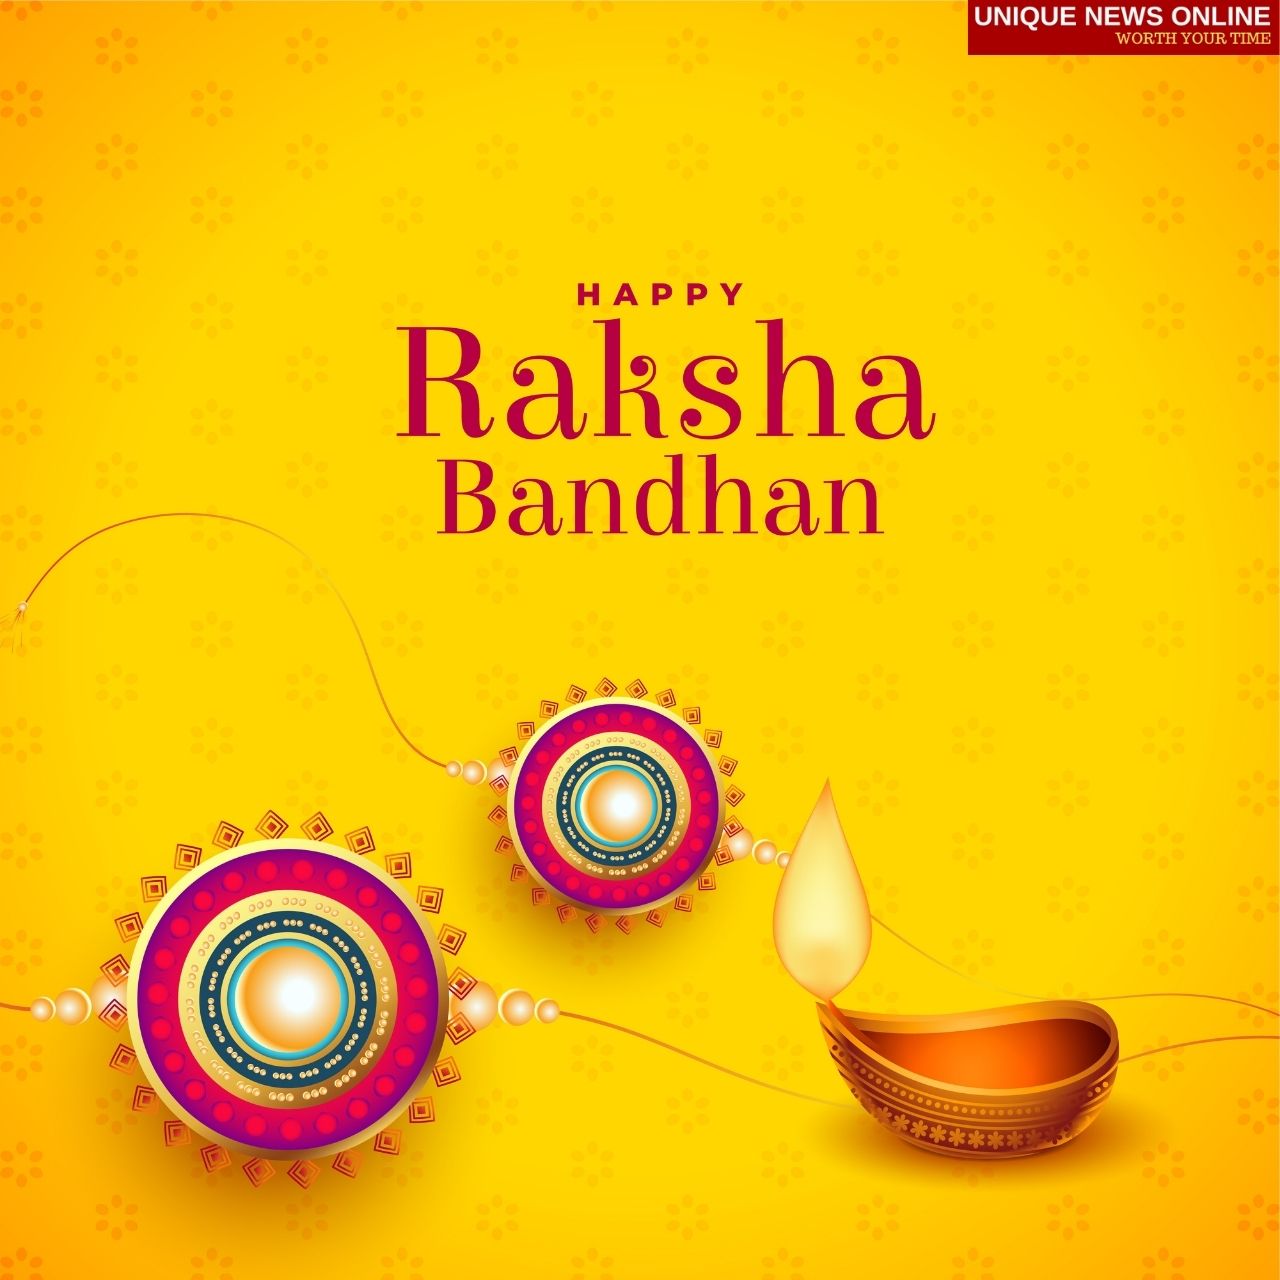 Happy Raksha Bandhan 2021 Wishes, Quotes, and HD Images to greet Brother or Sister